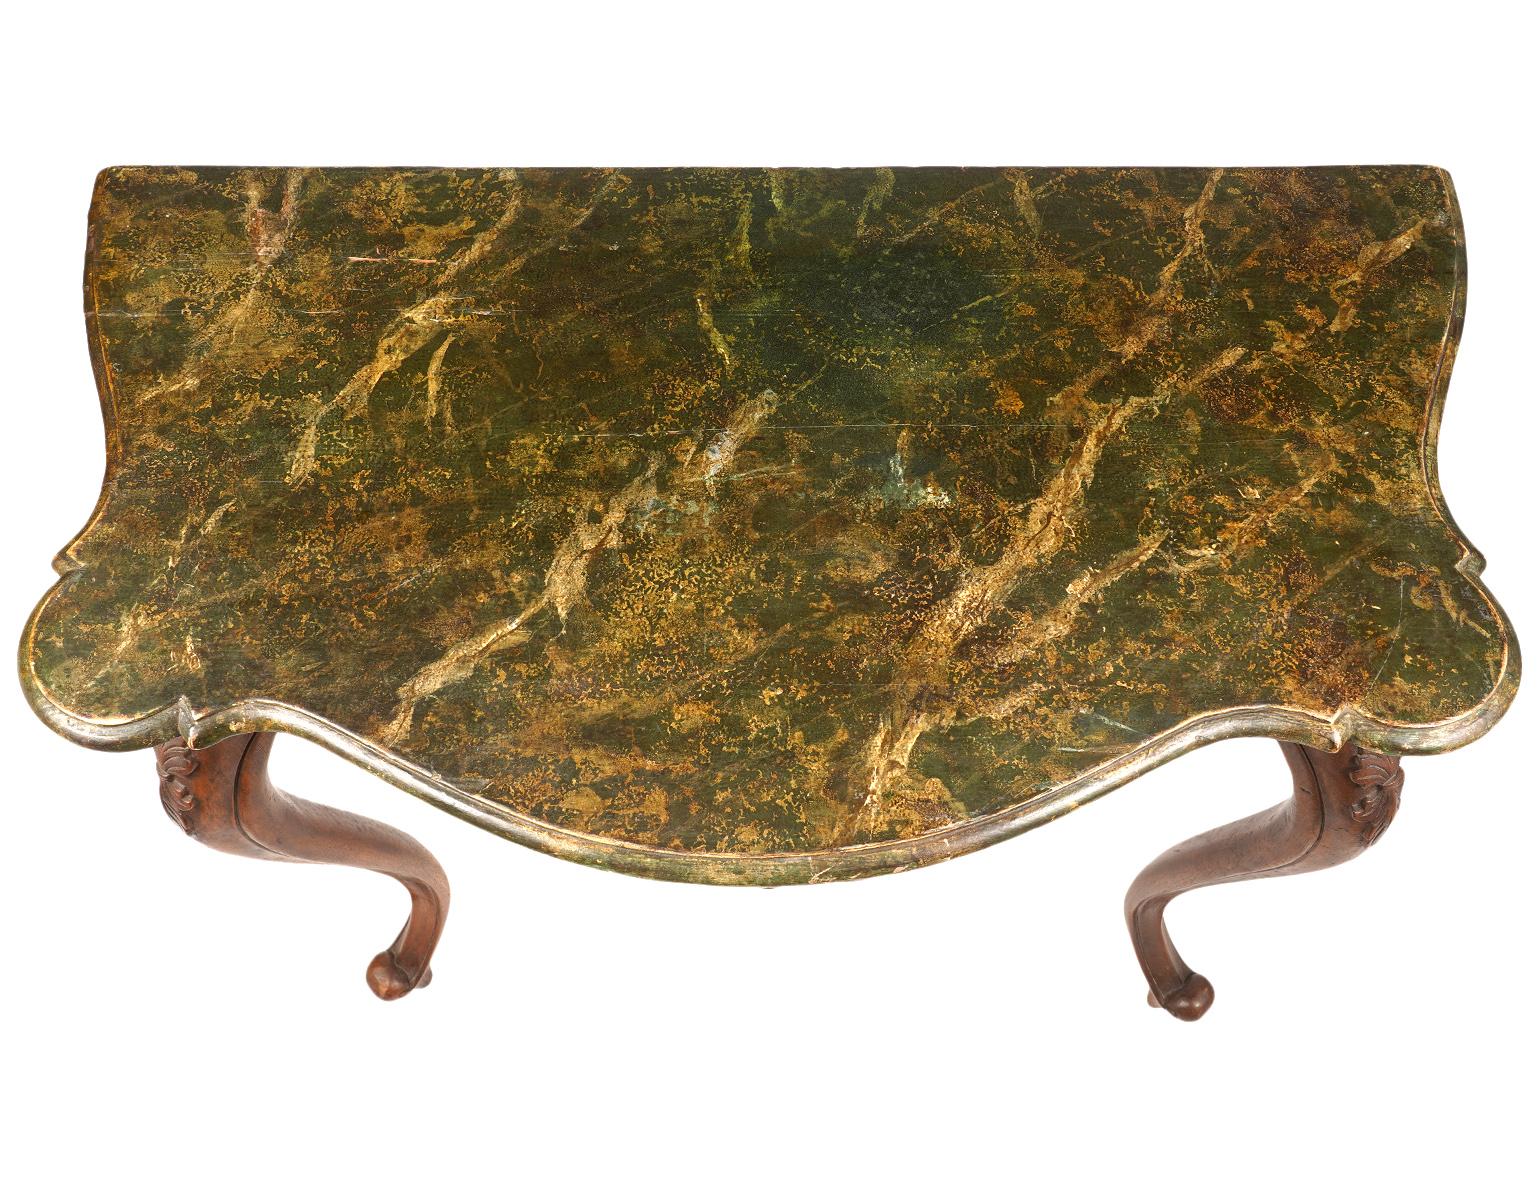 Resting on four boldly carved cabriole legs, the rear legs turned sideways, this Italian walnut console table, dating to the late 19th century, features a marbleized painted top above shaped aprons centering carved shells and scrolls on three sides.